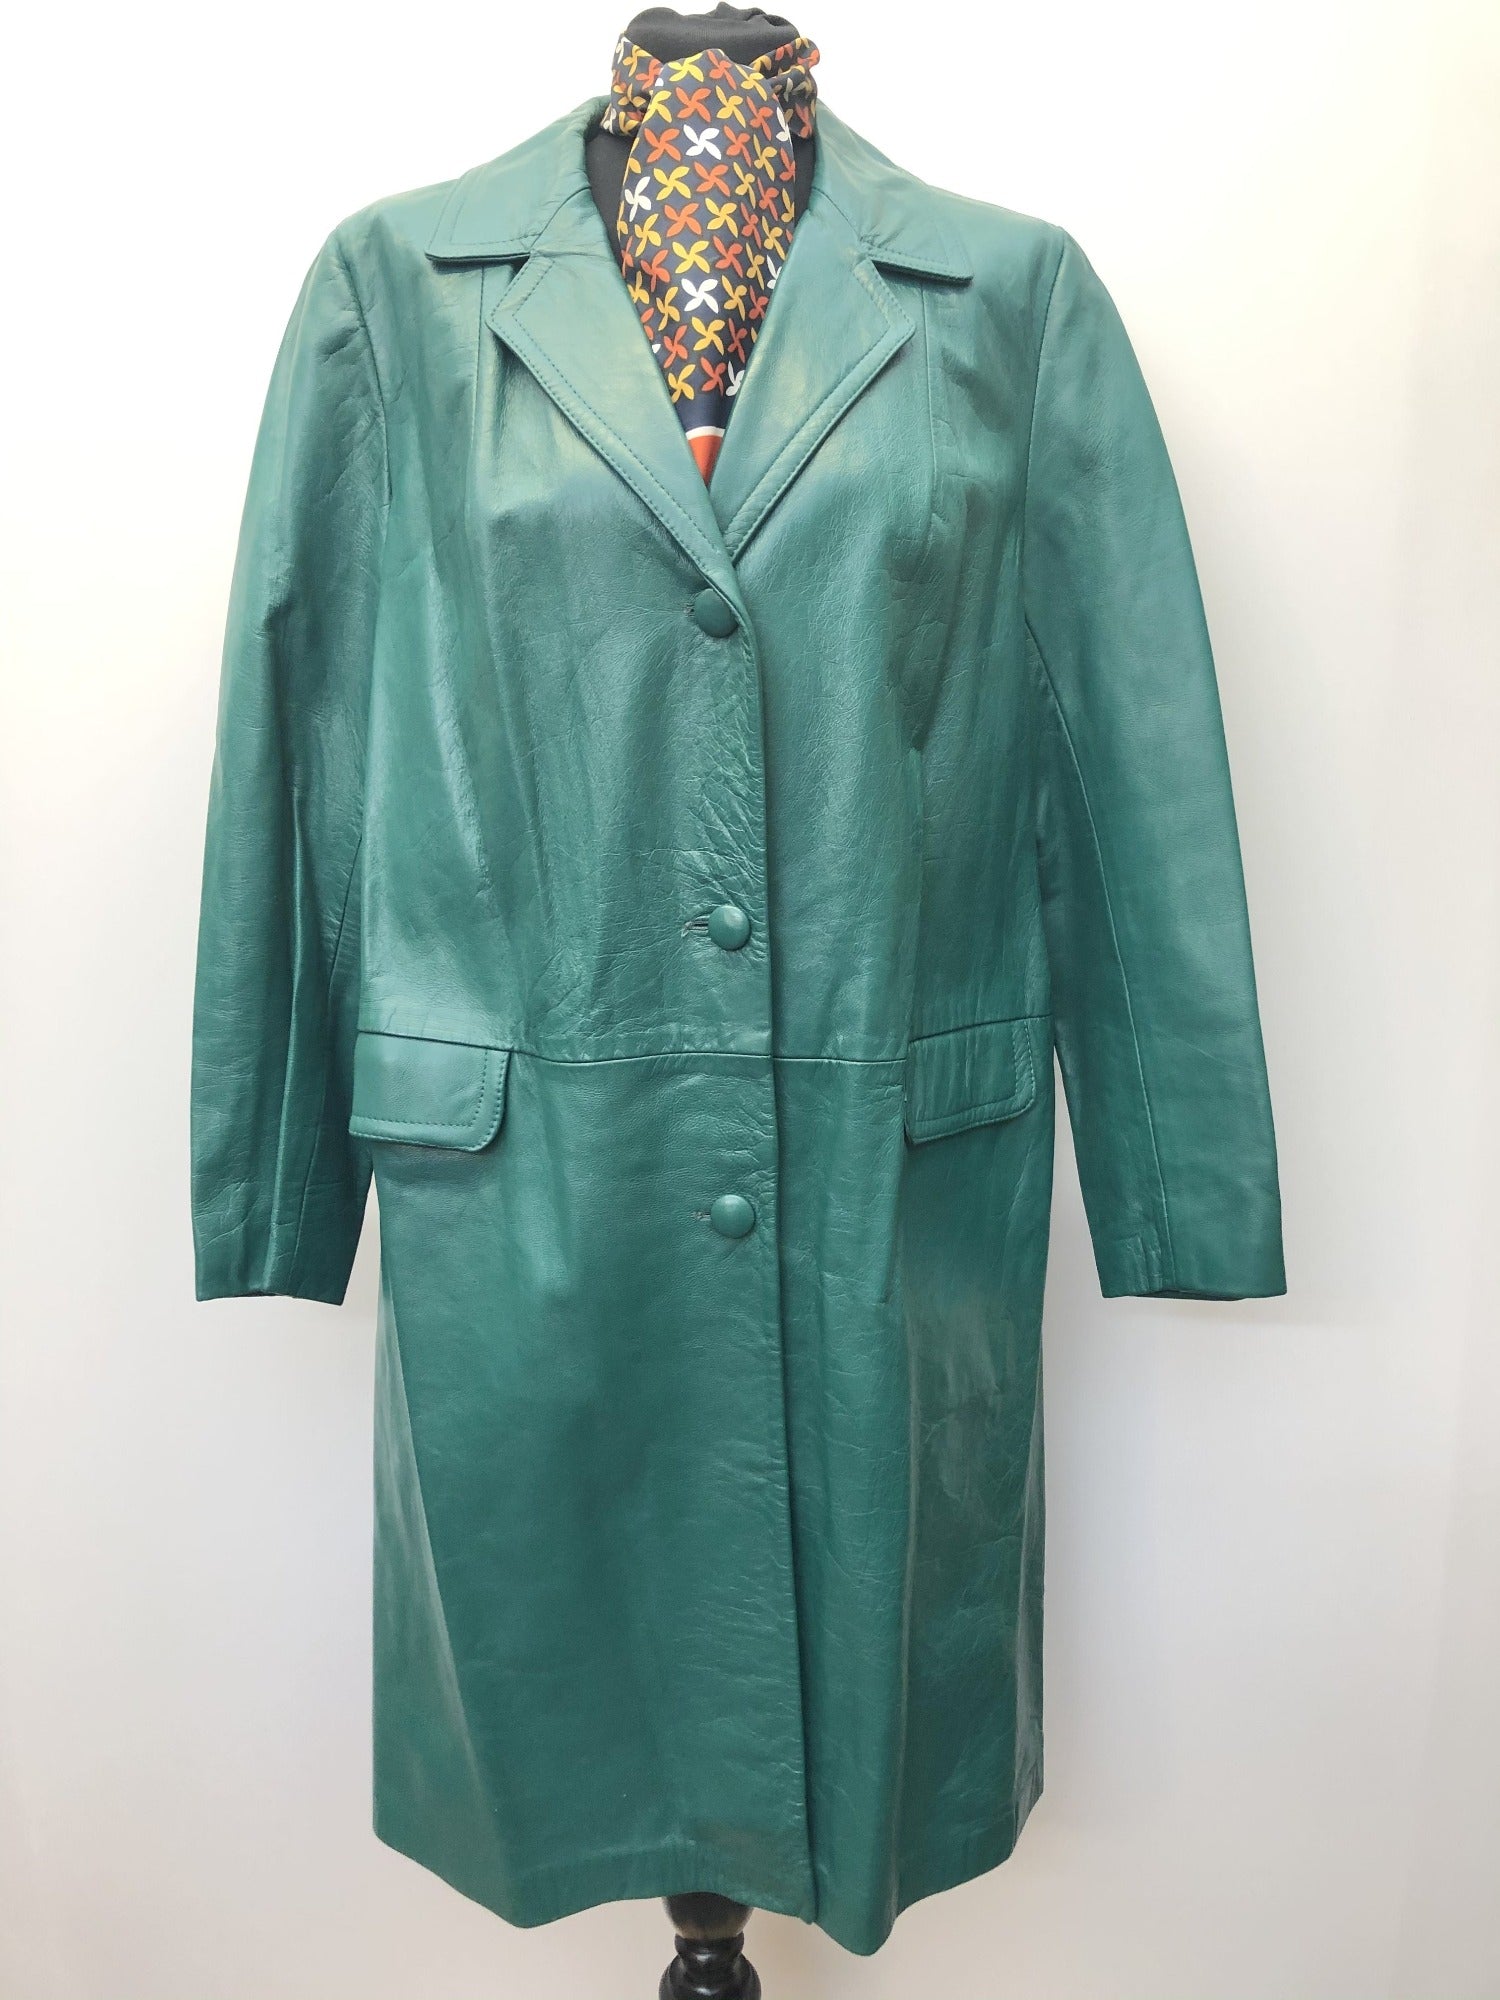 1960s Paul Blanche Leather Coat womens green MOD 60s loose fit coat Size 12 Viintage womens clothing Urban Village Vintage